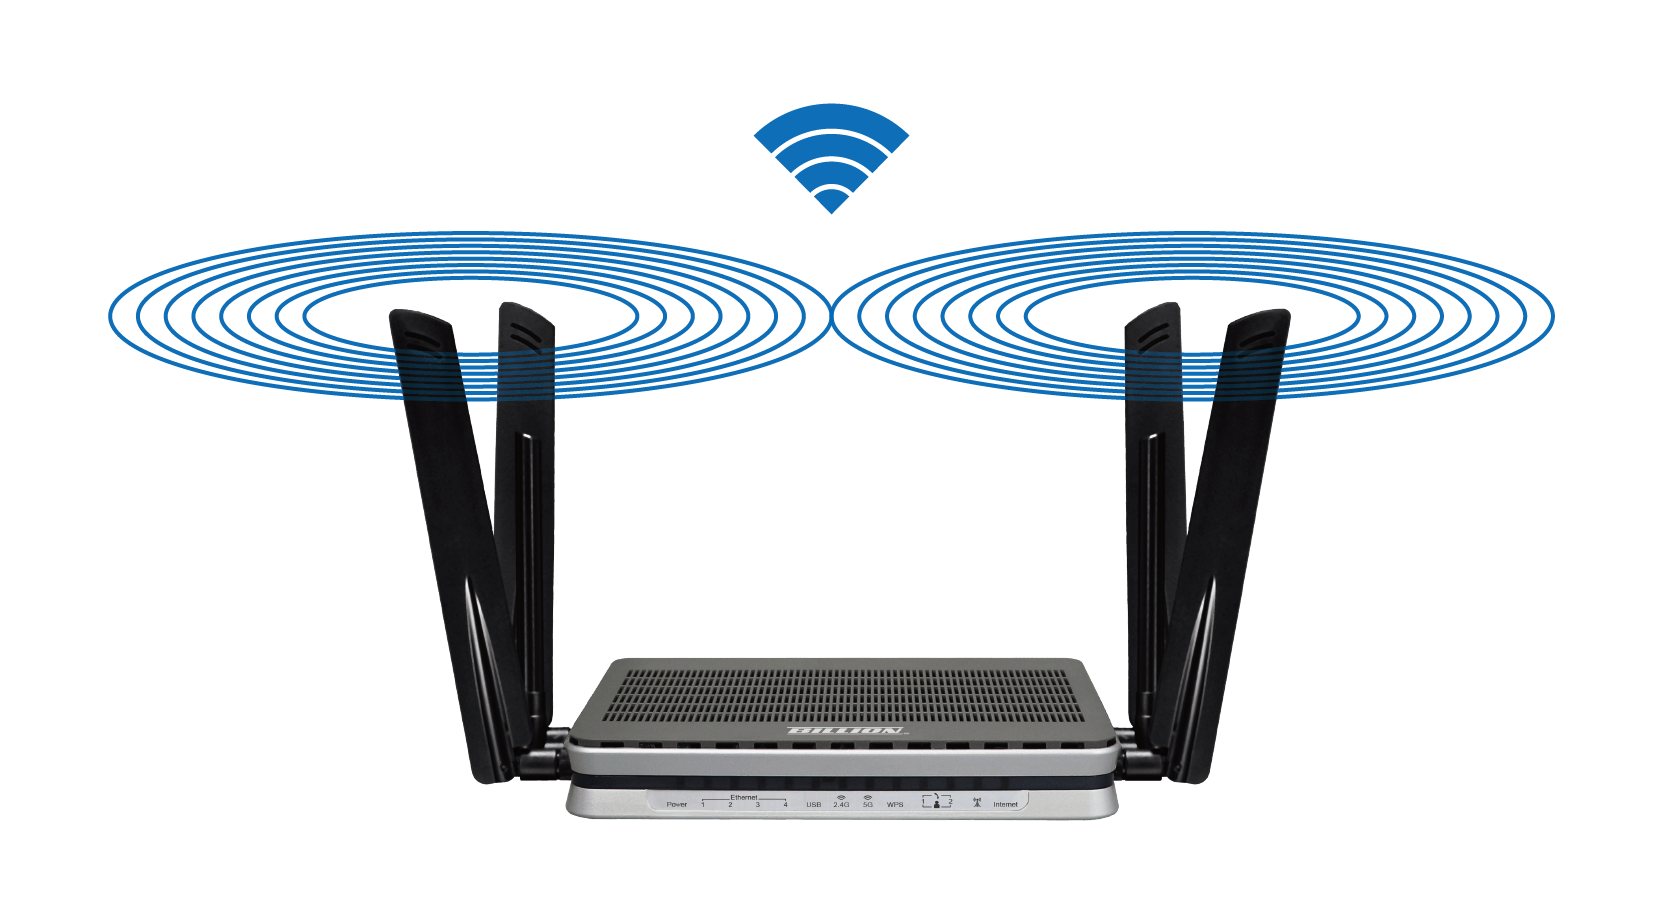 Wi-Fi spreads out in the direction perpendicular to that of the antennas